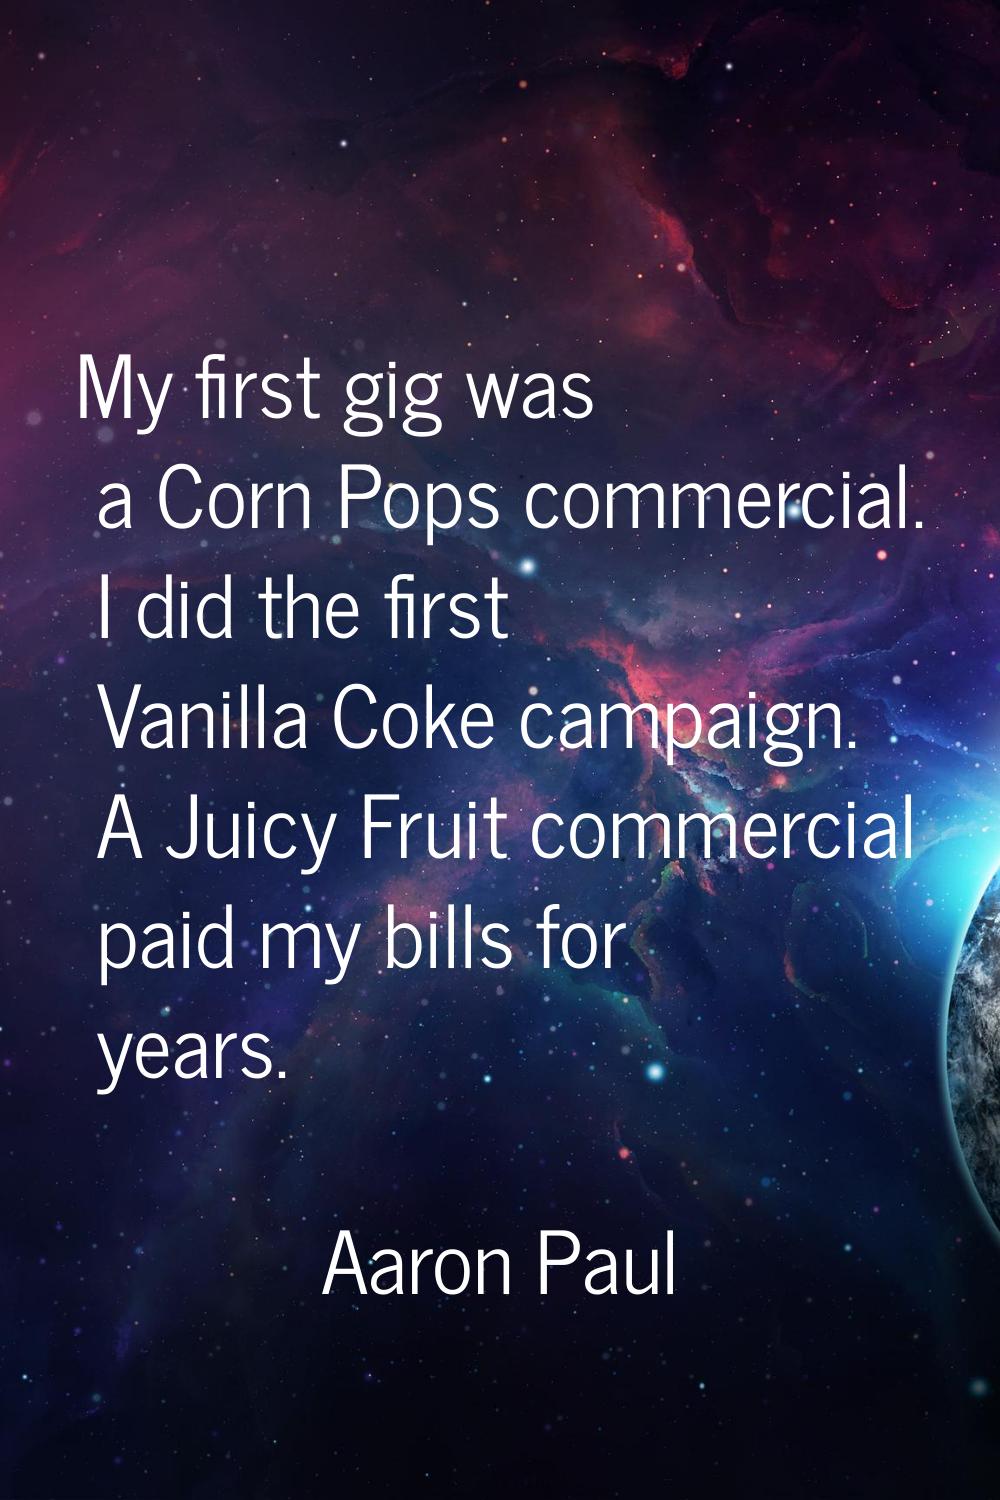 My first gig was a Corn Pops commercial. I did the first Vanilla Coke campaign. A Juicy Fruit comme